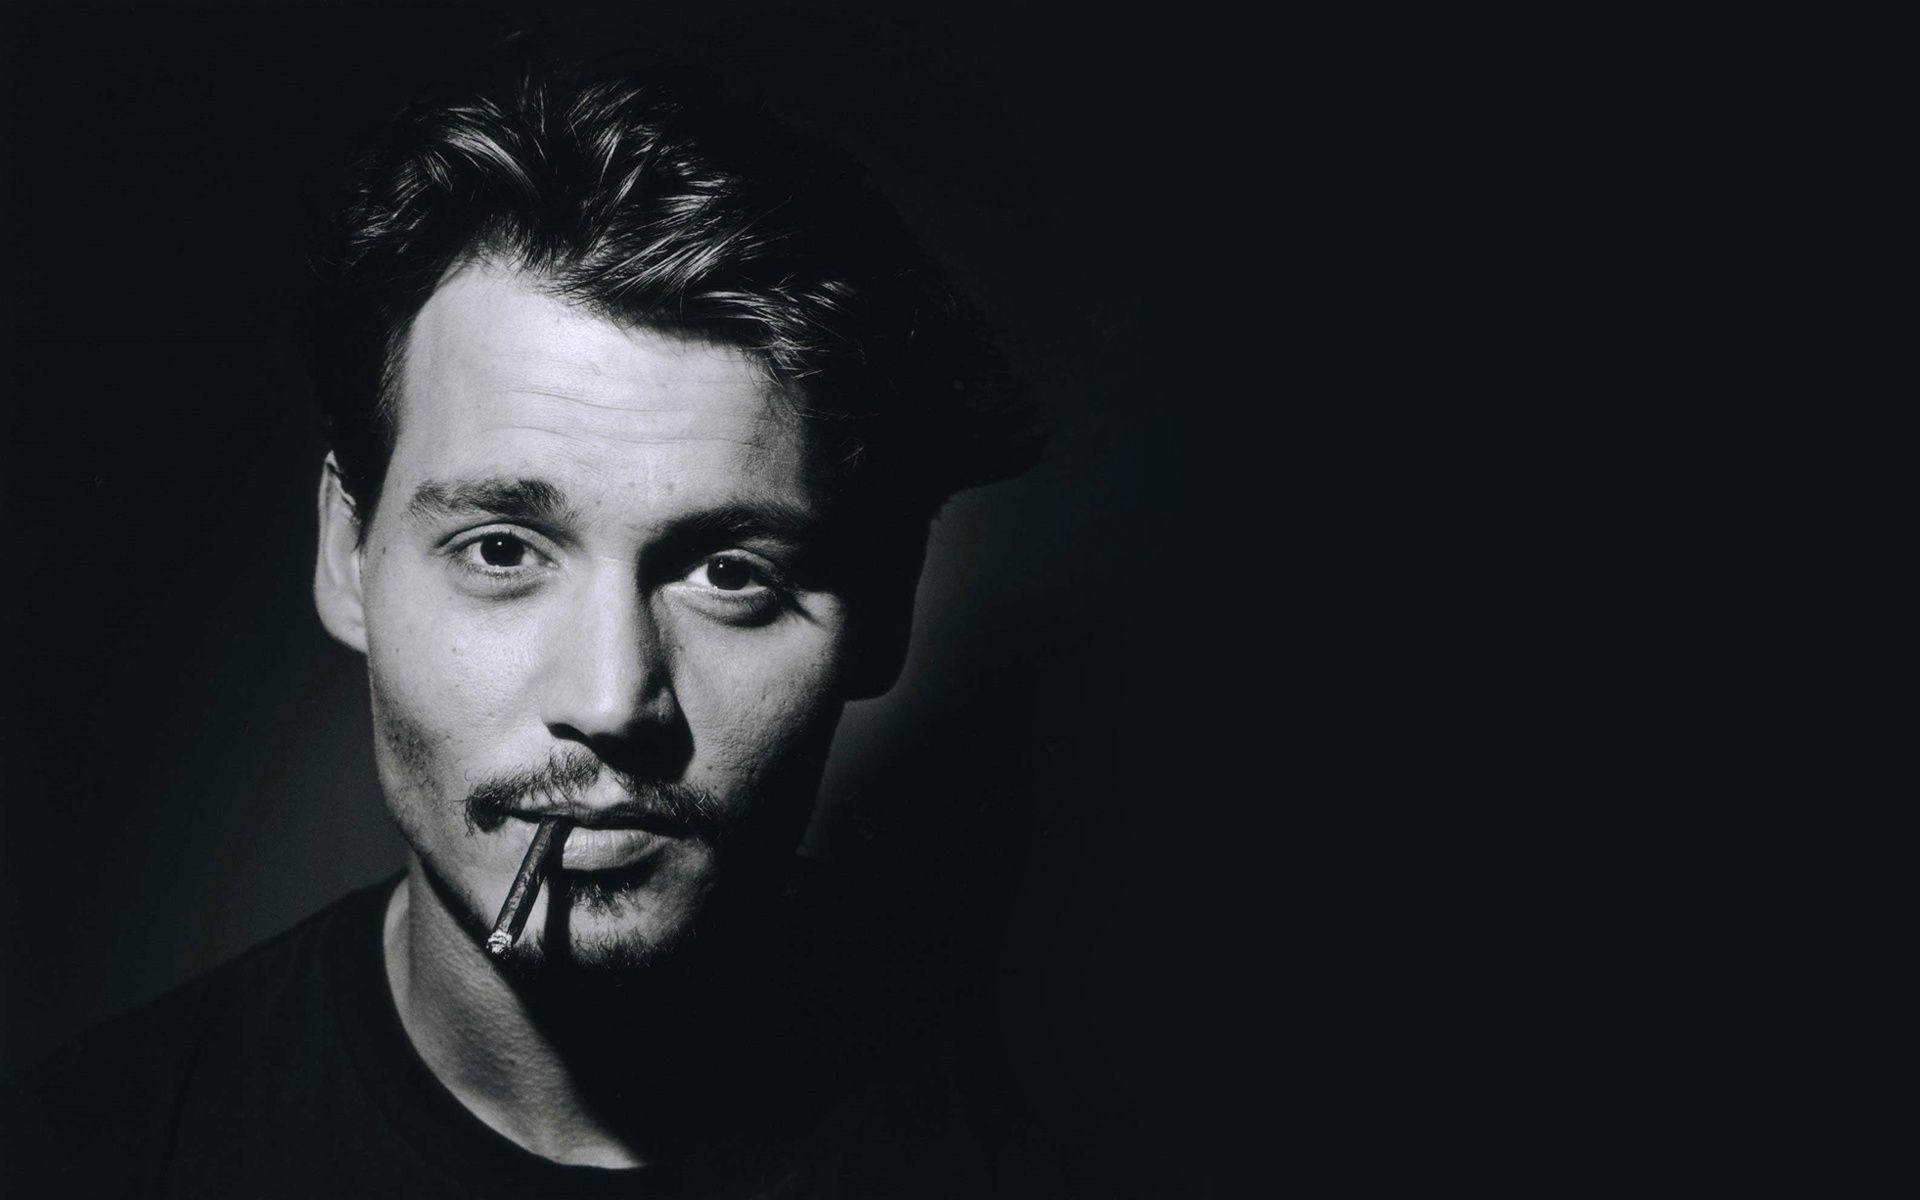 Free Download HD Wallpaper of Hollywood actor Johnny Depp